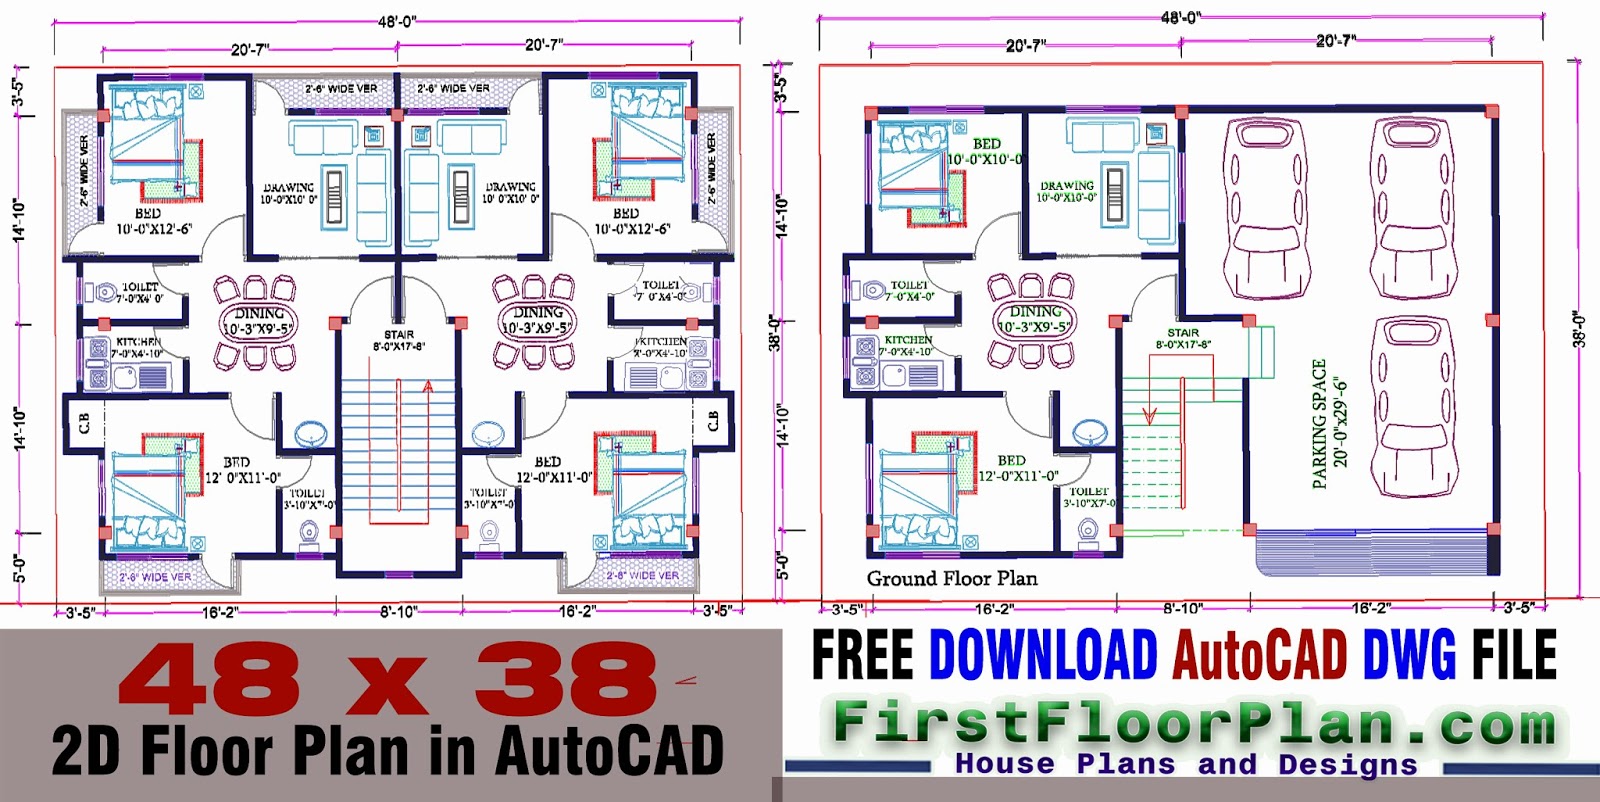 2d Floor Plan In Autocad With Dimensions 38 X 48 Dwg And Pdf File - Vrogue